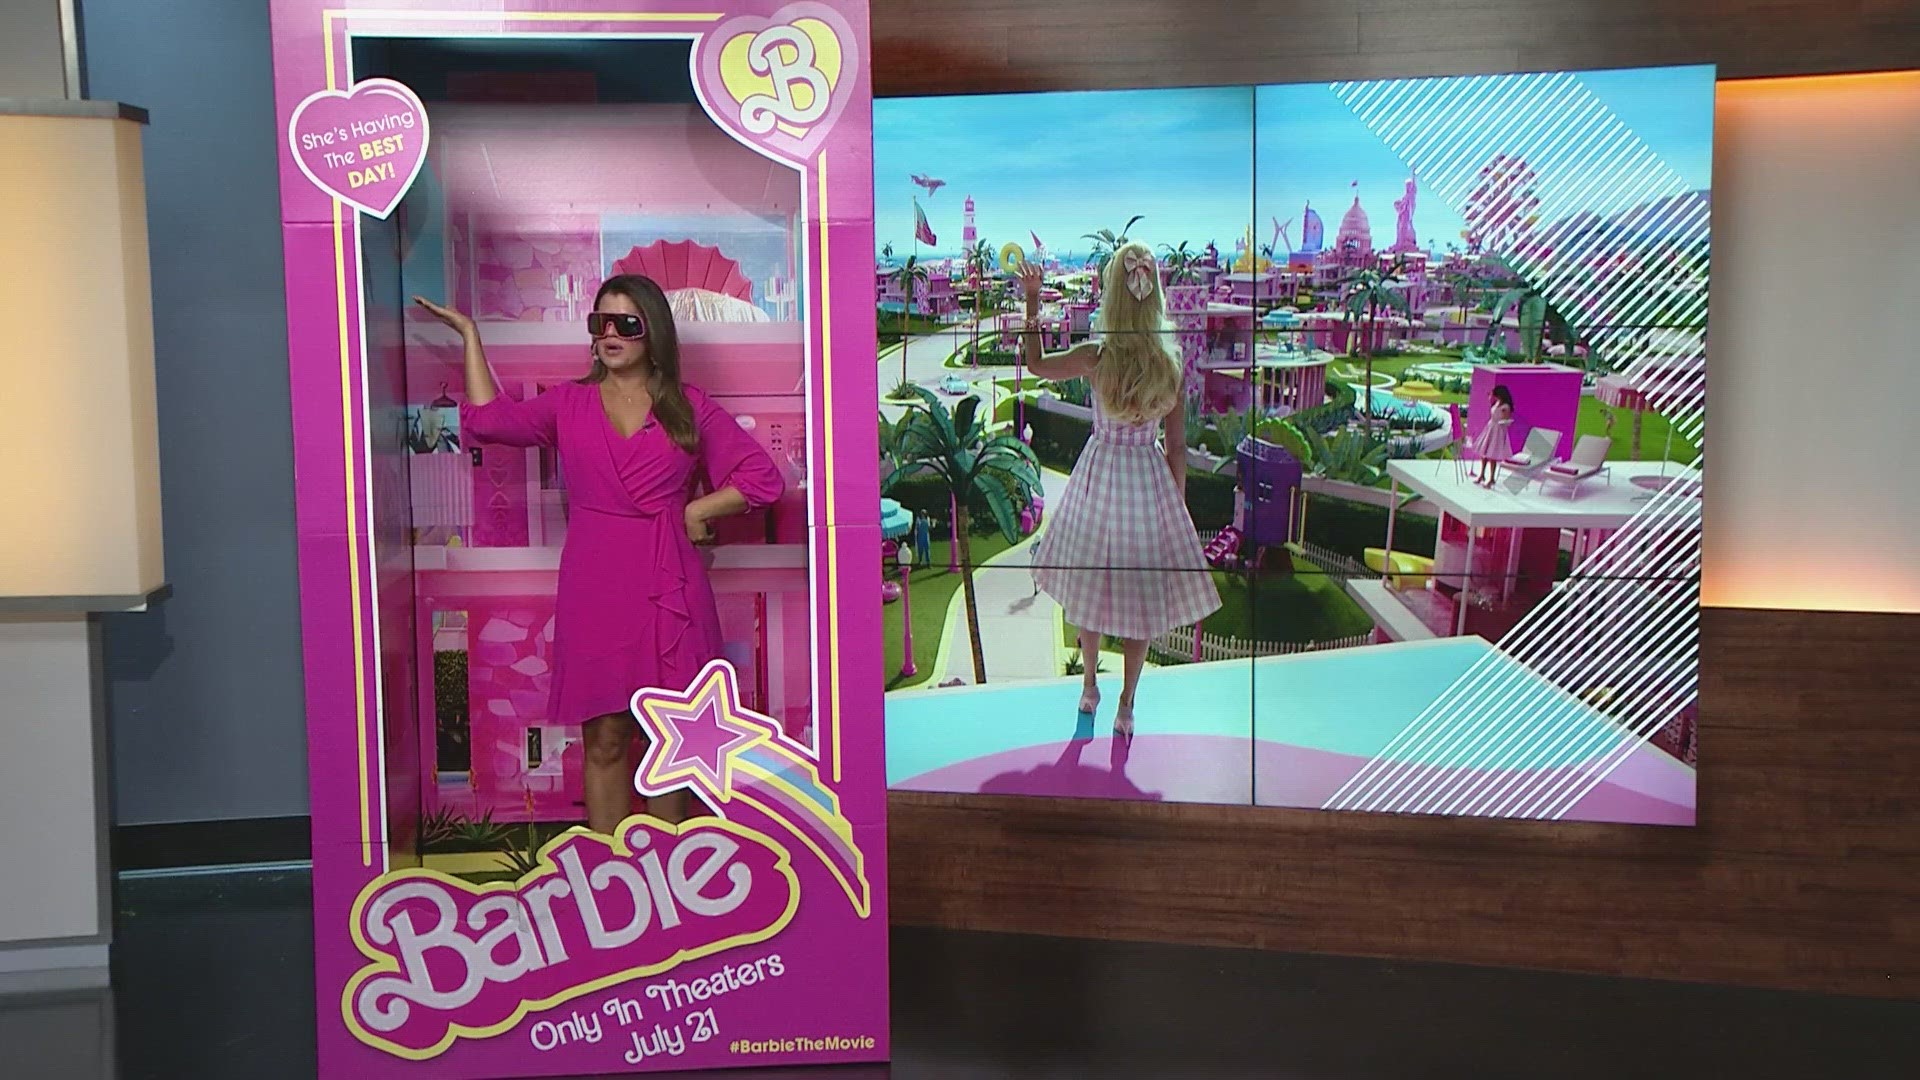 'Barbie' the movie is expected to win big at the box office when it premieres later this week.